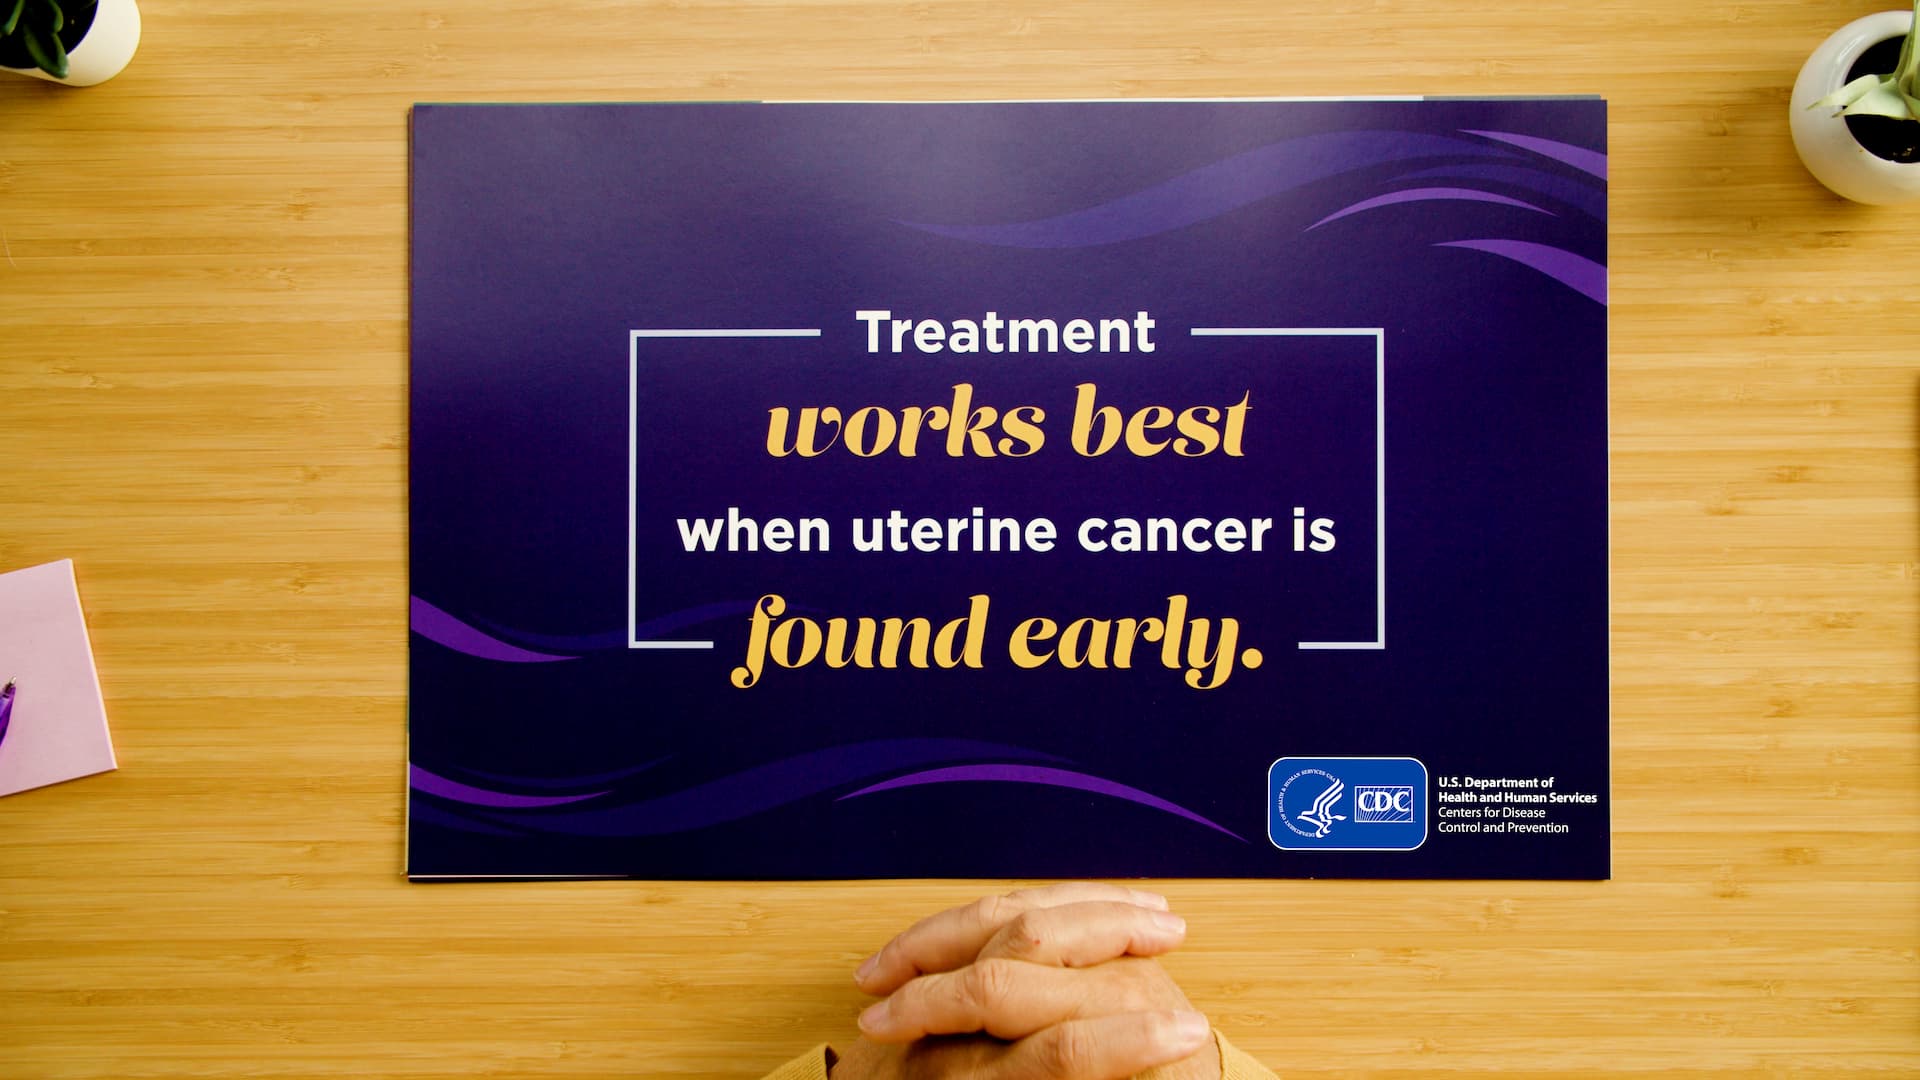 Treatment works best when uterine cancer is found early.